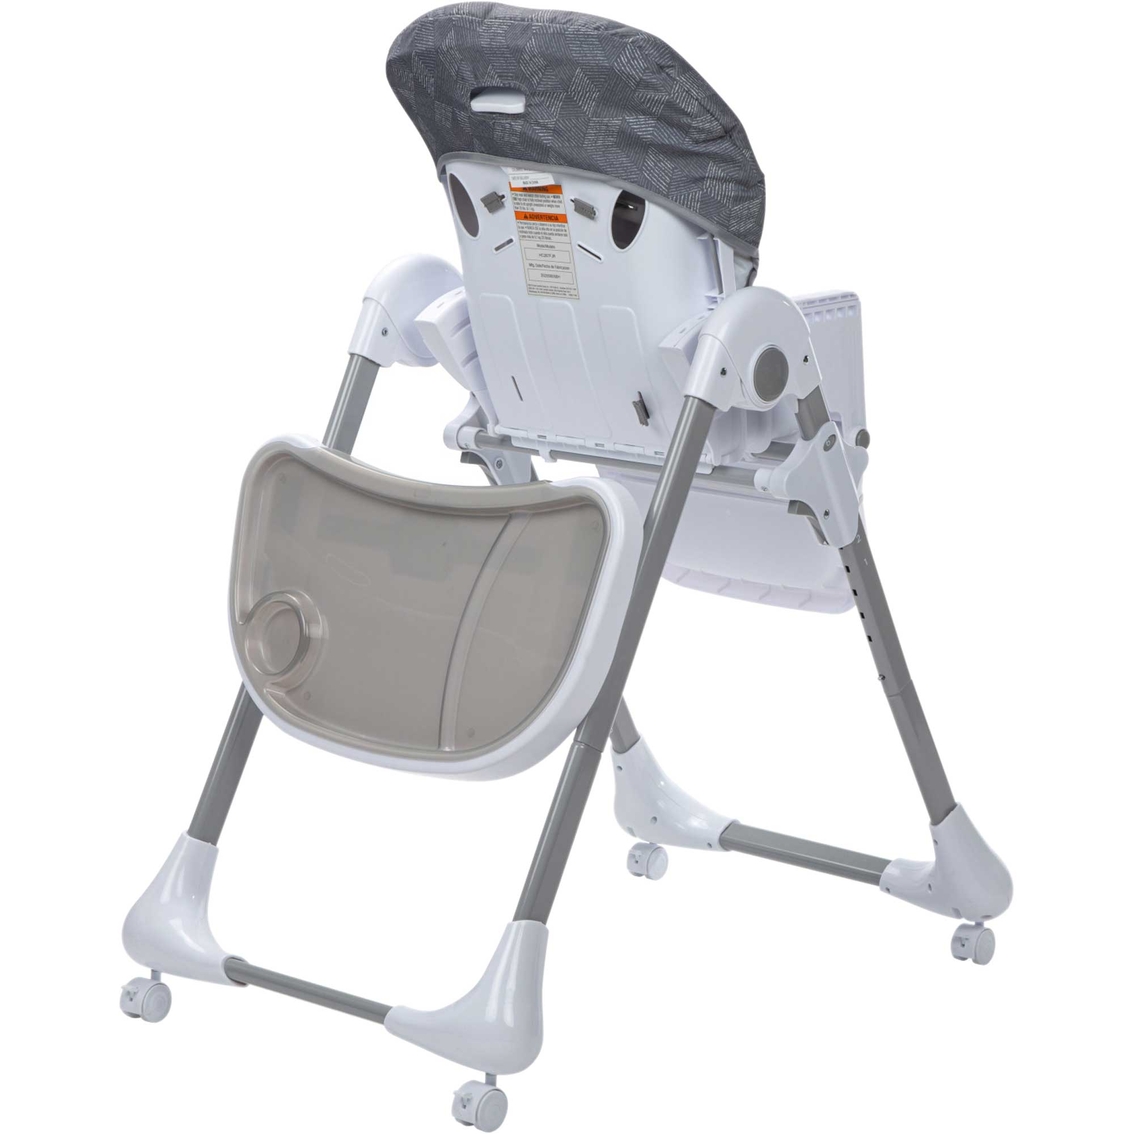 Safety 1st 3-in-1 Grow and Go High Chair - Image 2 of 6